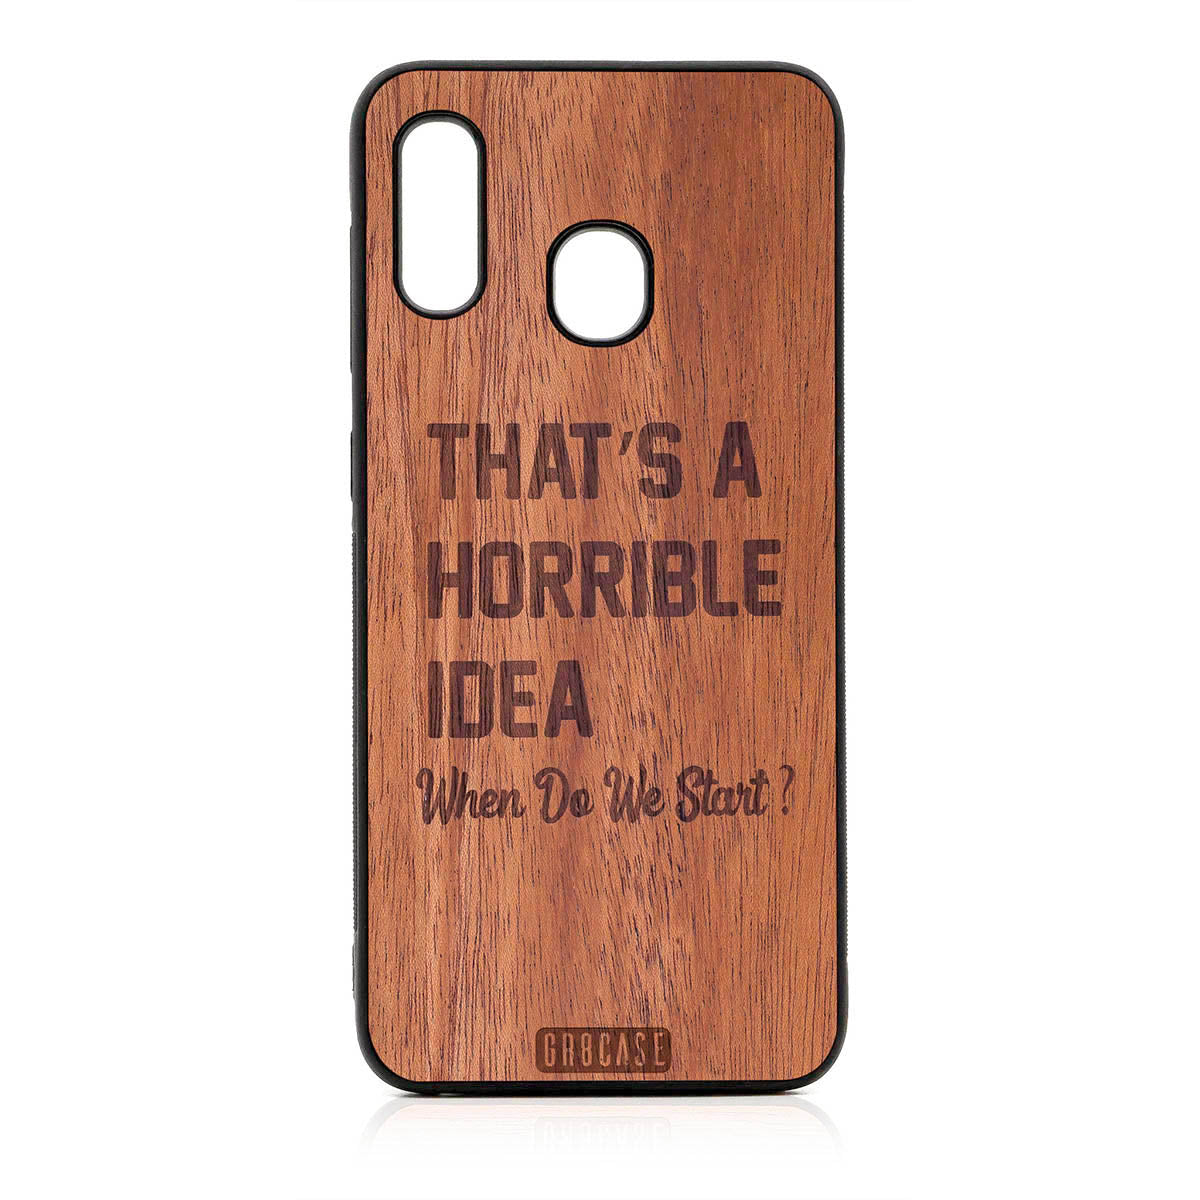 That's A Horrible Idea When Do We Start? Design Wood Case For Samsung Galaxy A20